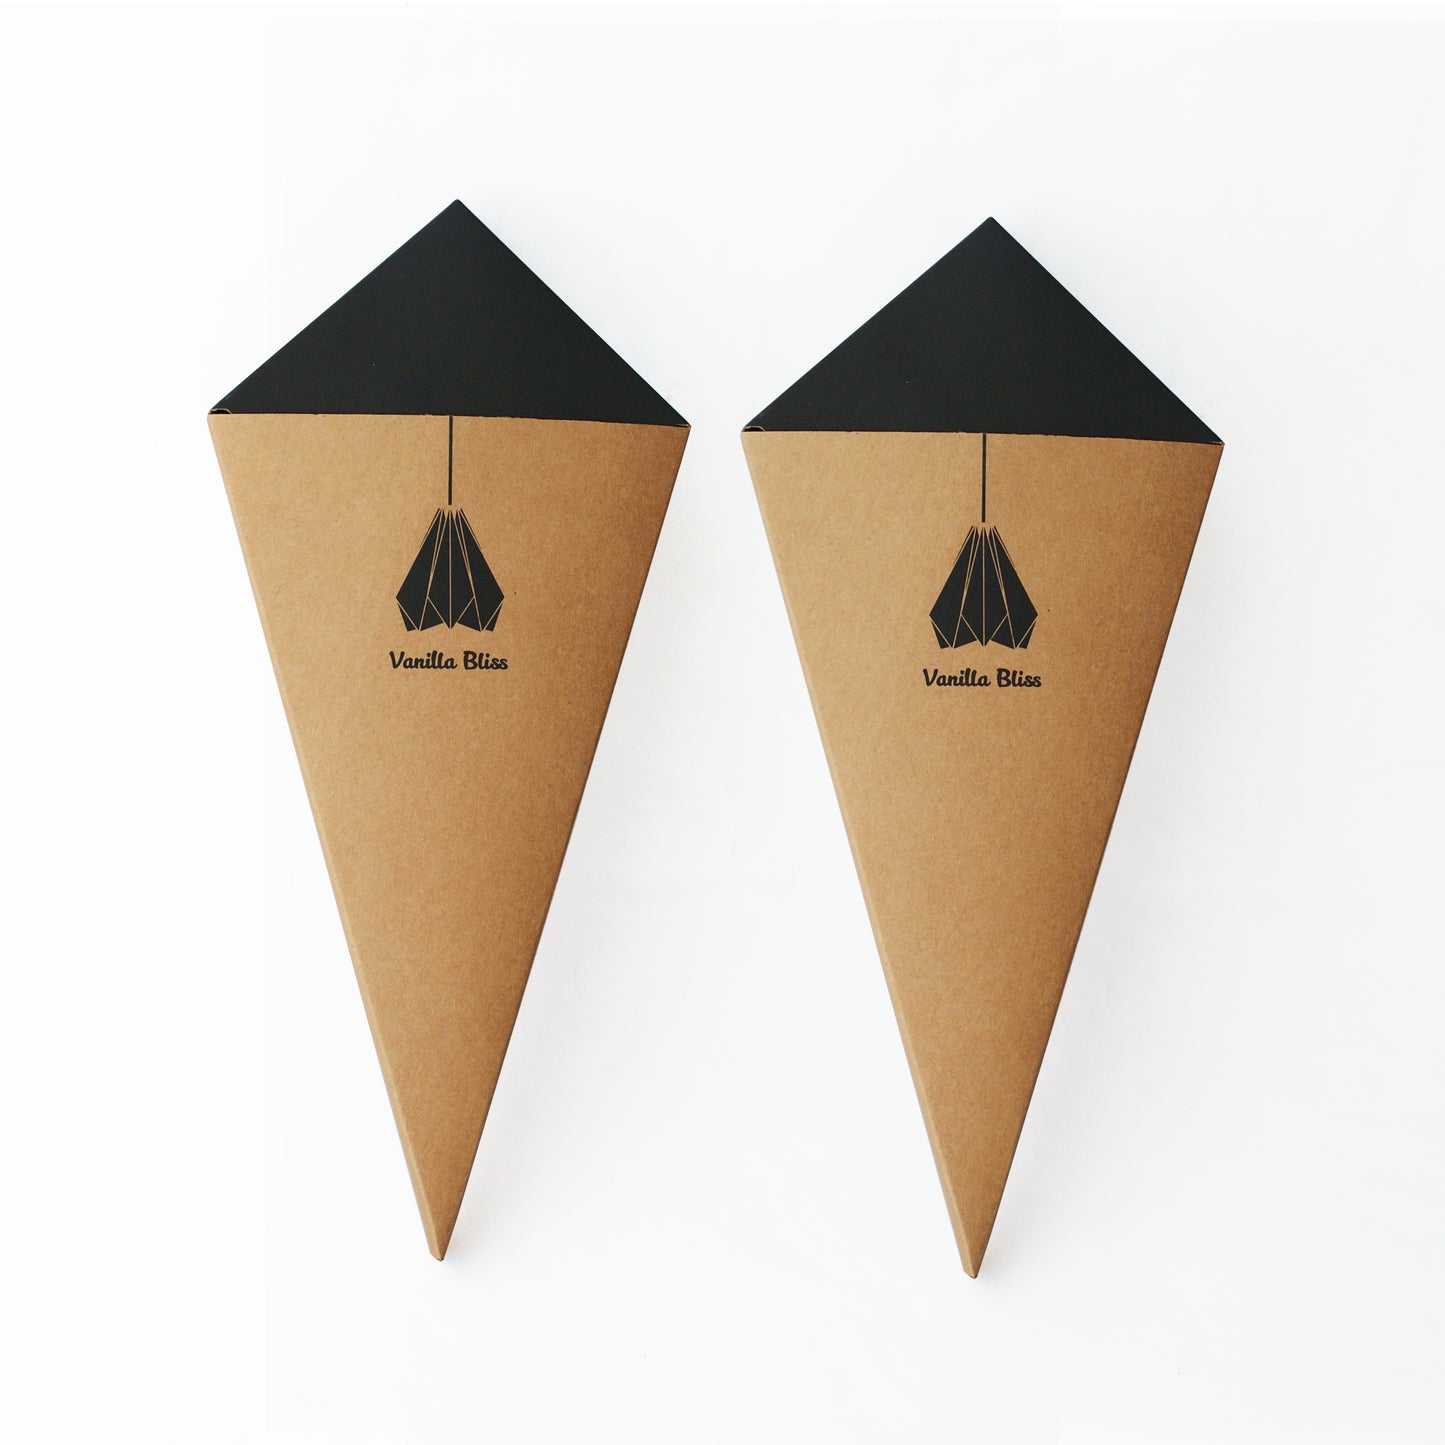 Origami Gift Ideas Online Brown Paper Lamp Packaging Design